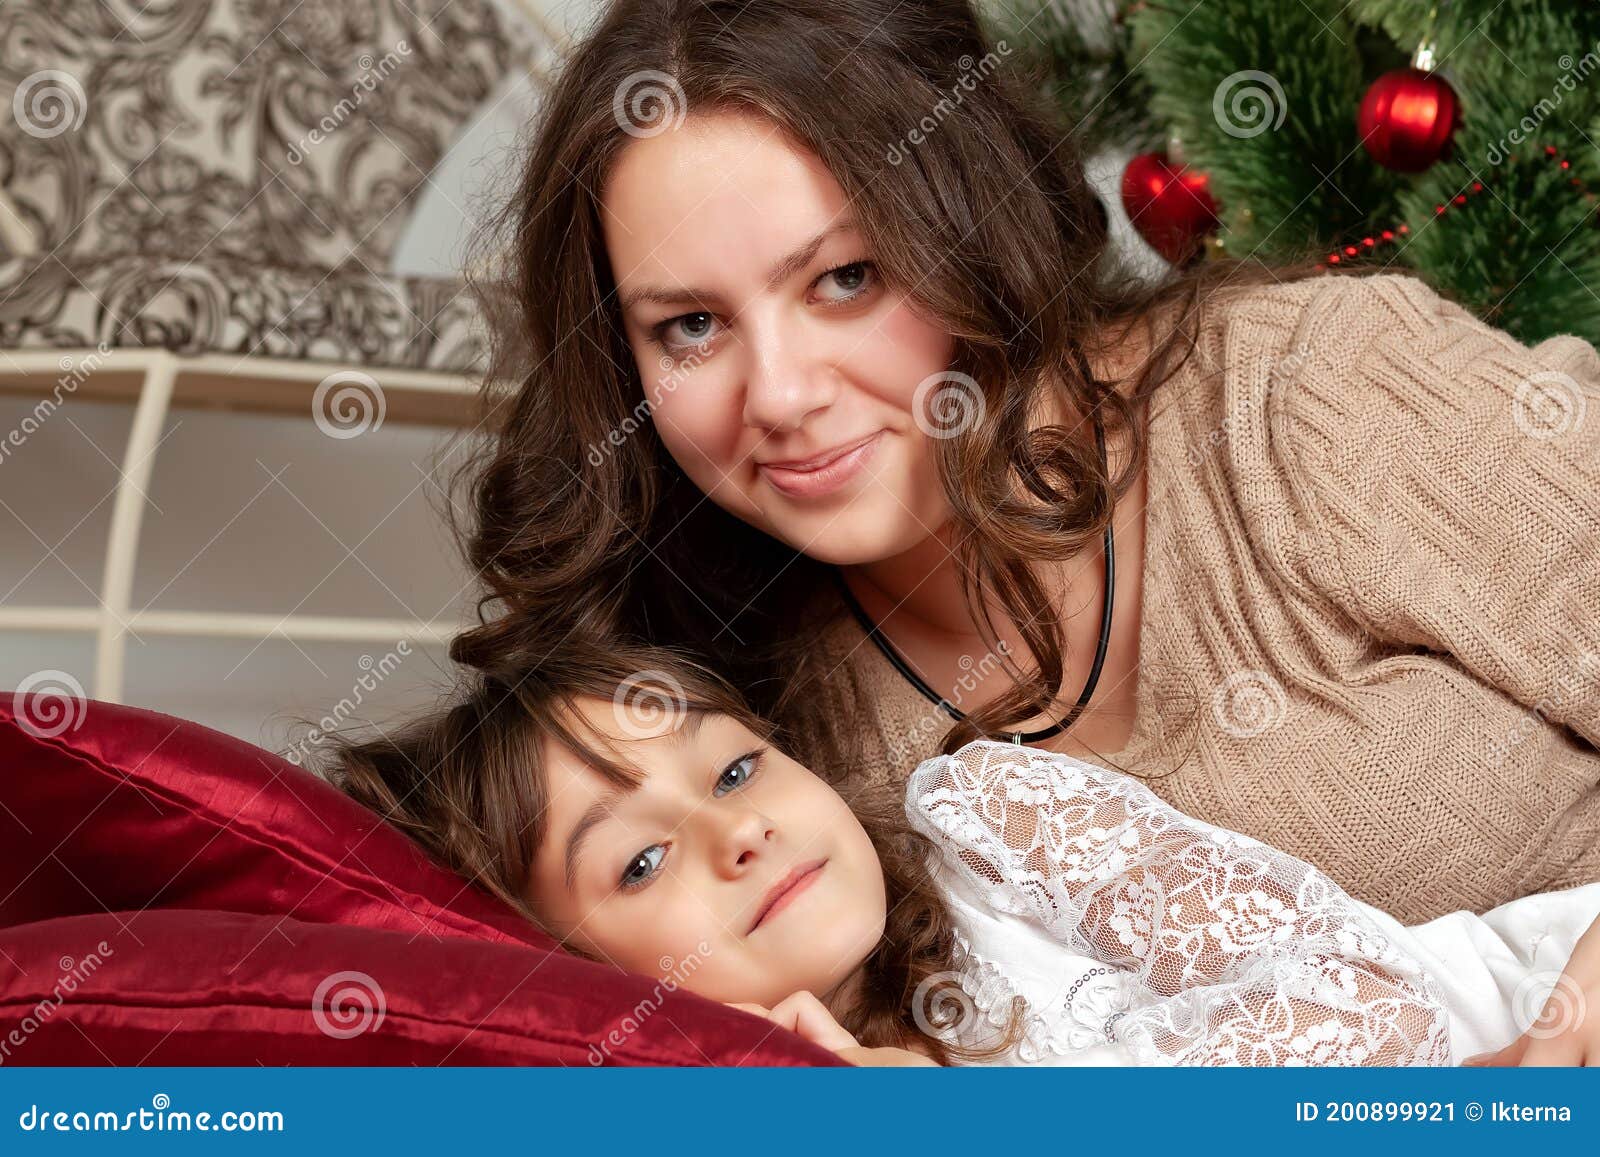 Mom And Daughter Lie On Pillows Under Christmas Tree Stock Image Image Of Decoration Happy